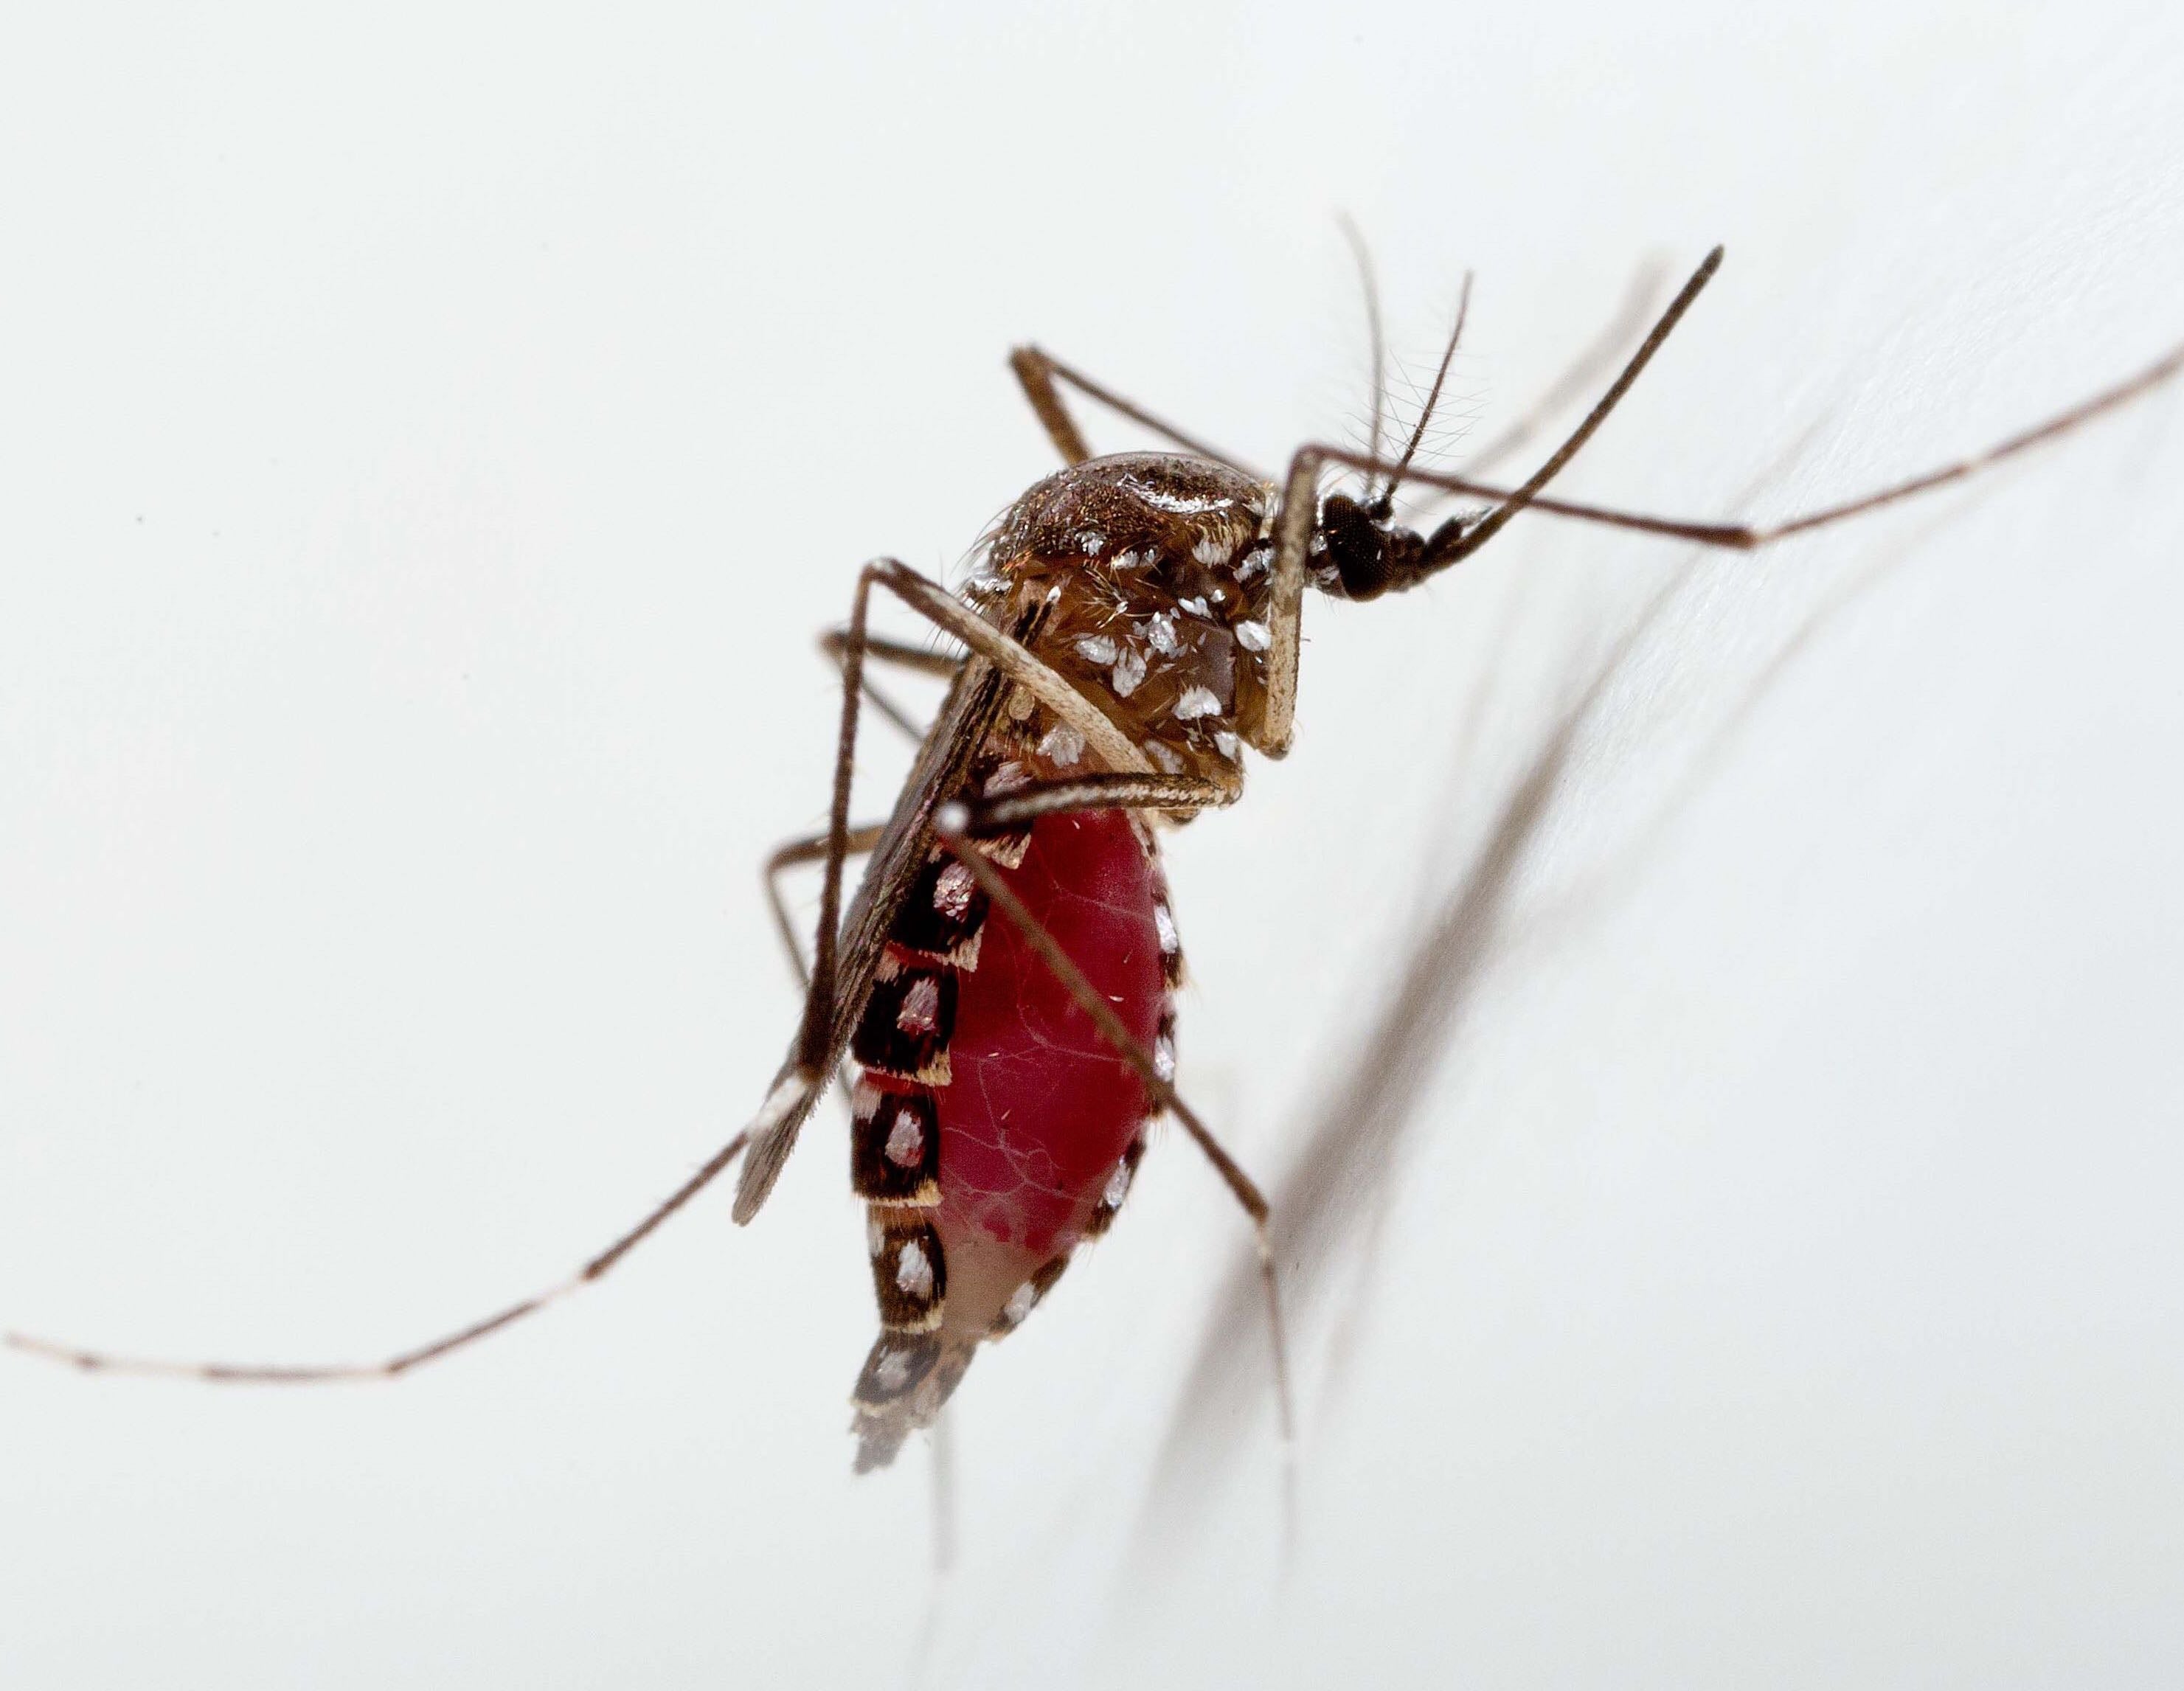 How mosquitos and mammals factor into COVID-19 story - WHYY